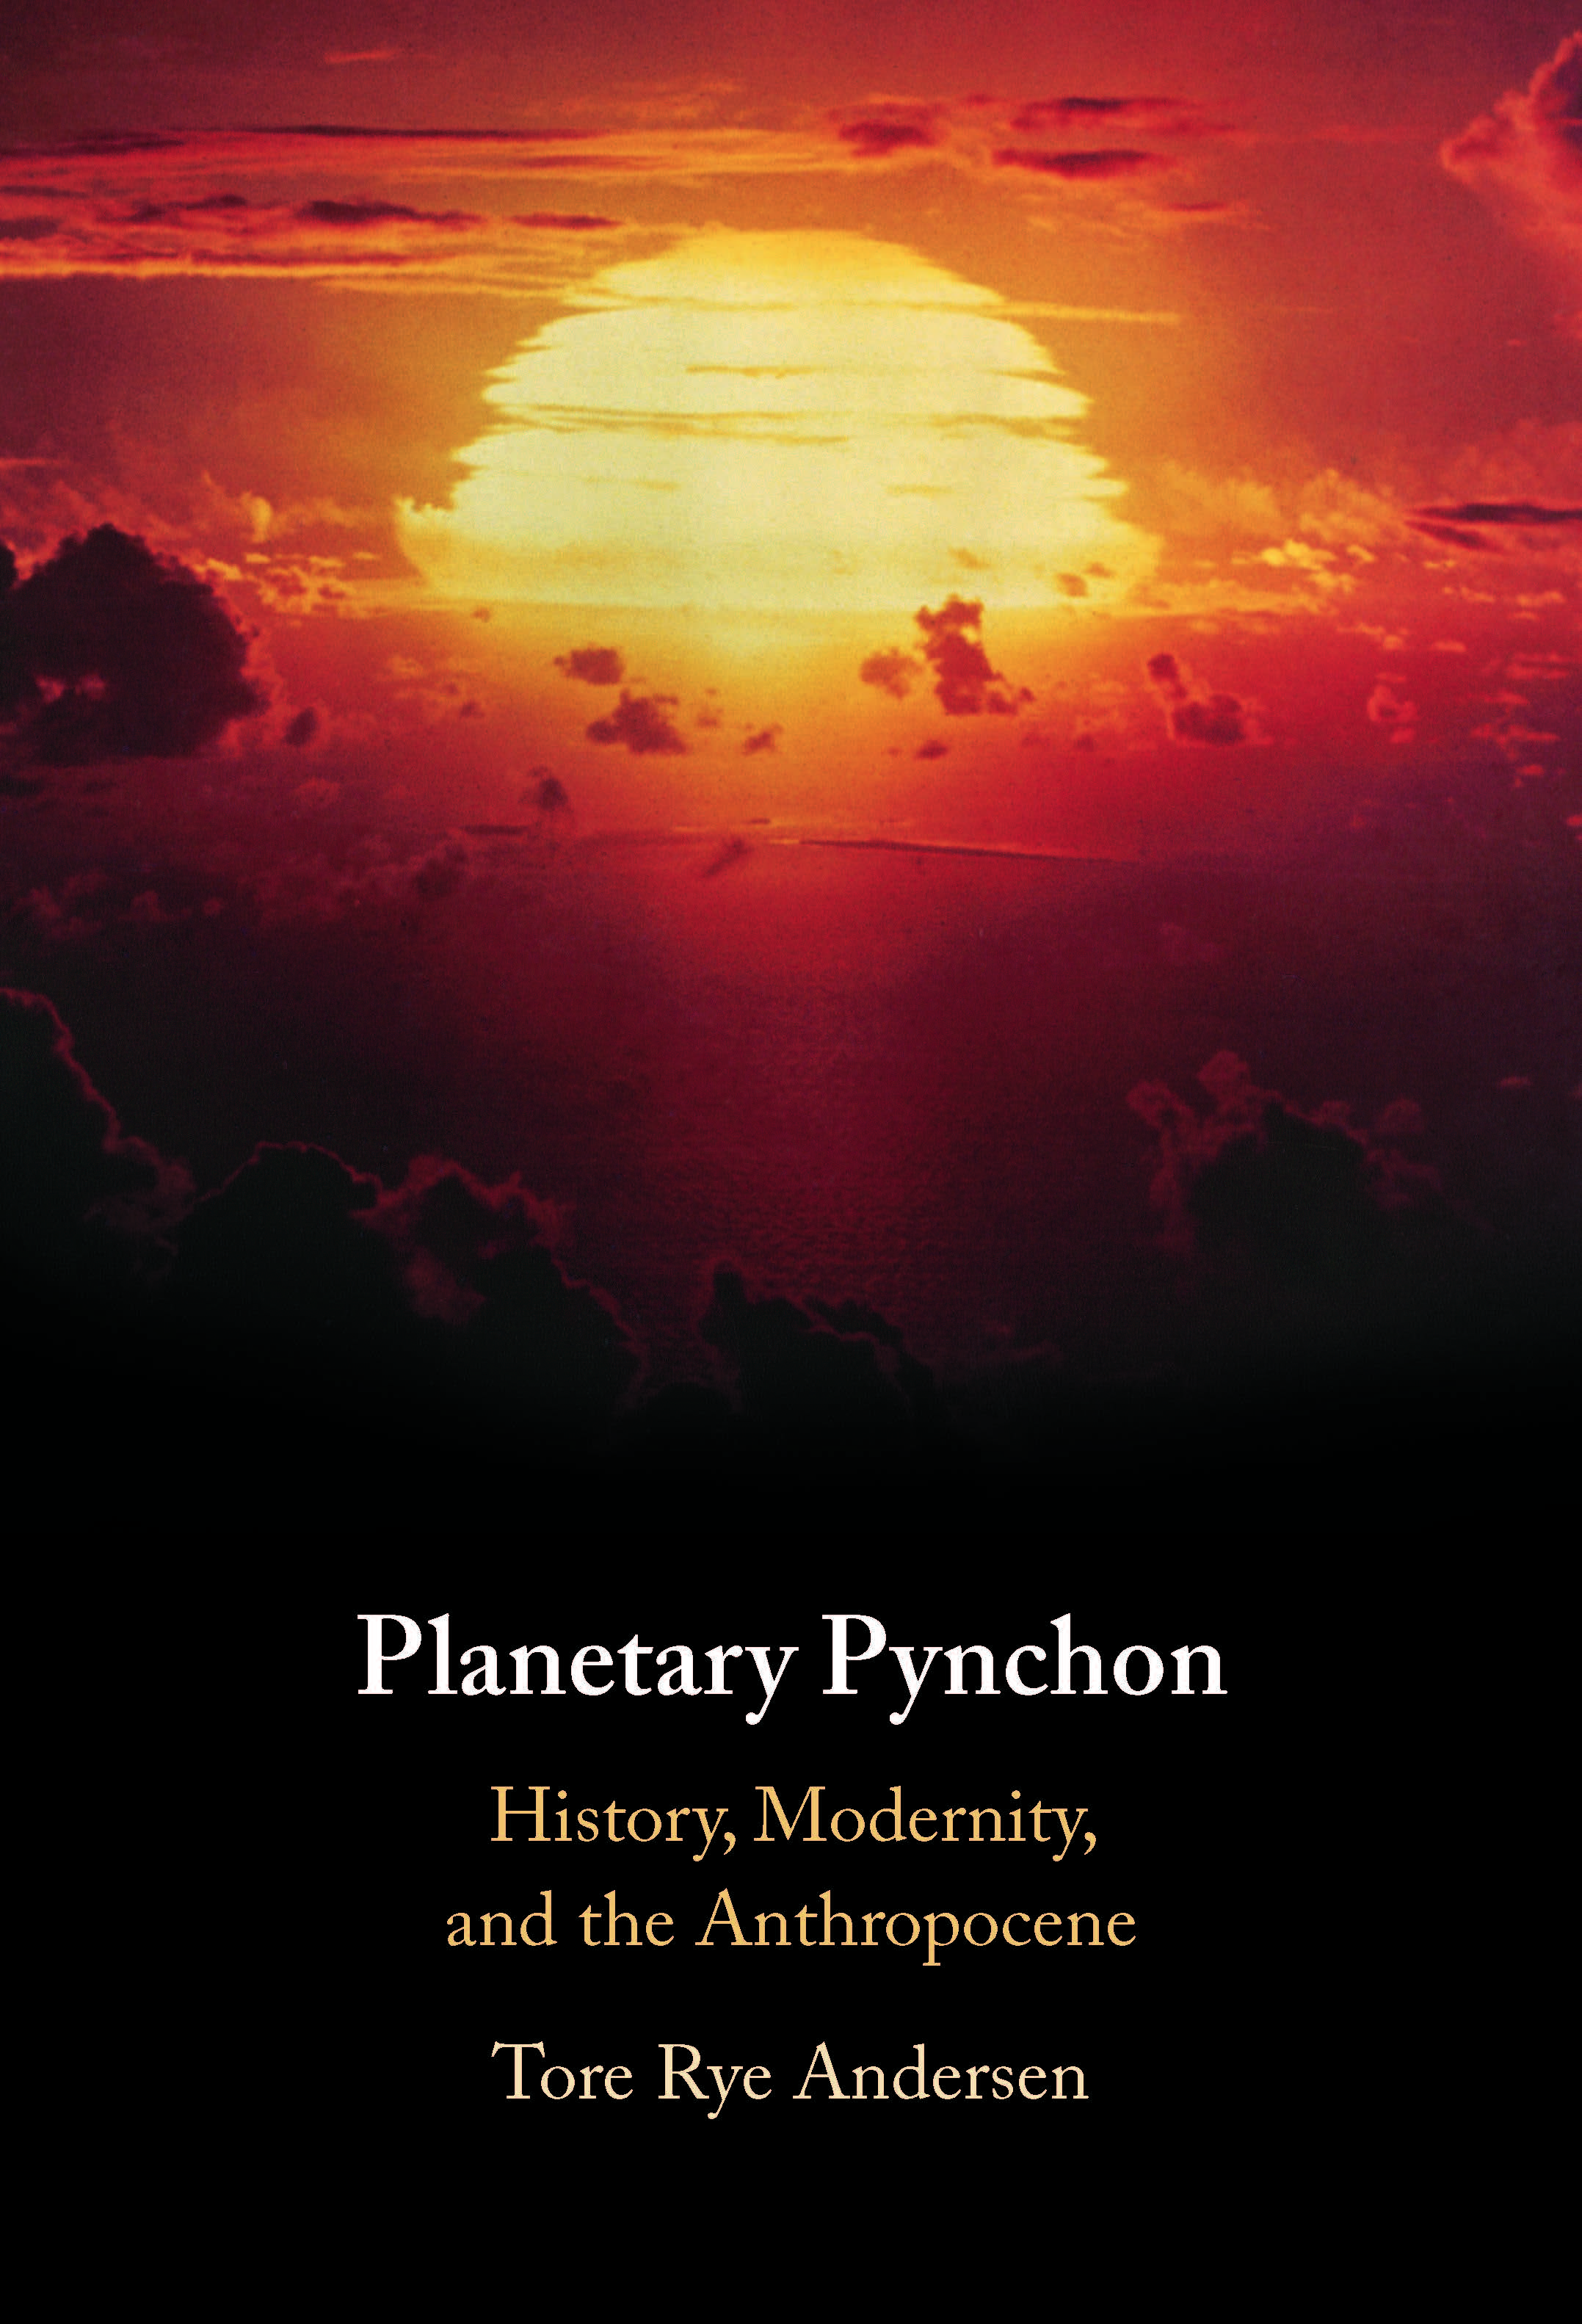 Book cover page of "Planetary Pynchon History, Modernity, and the Anthropocene" by Tore Rye Andersen